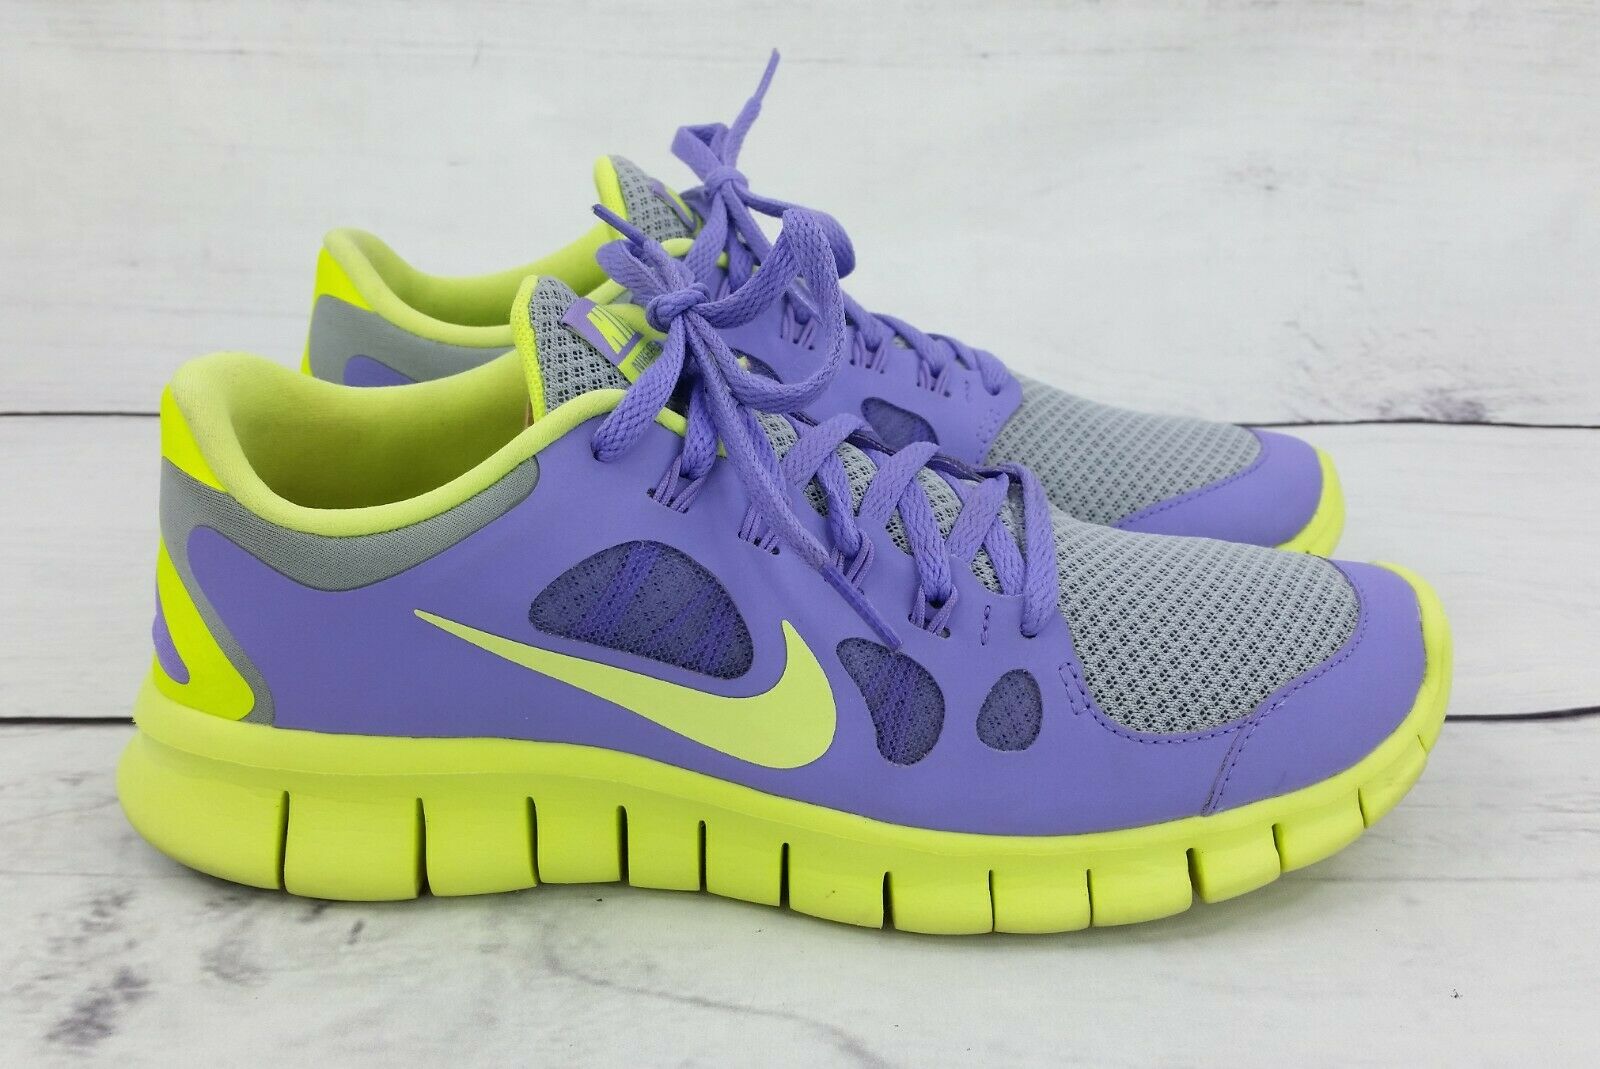 Nike Free 5.0 Neon Green Volt-Violet Running Shoes Sneakers Sz 7 Y Youth Girls